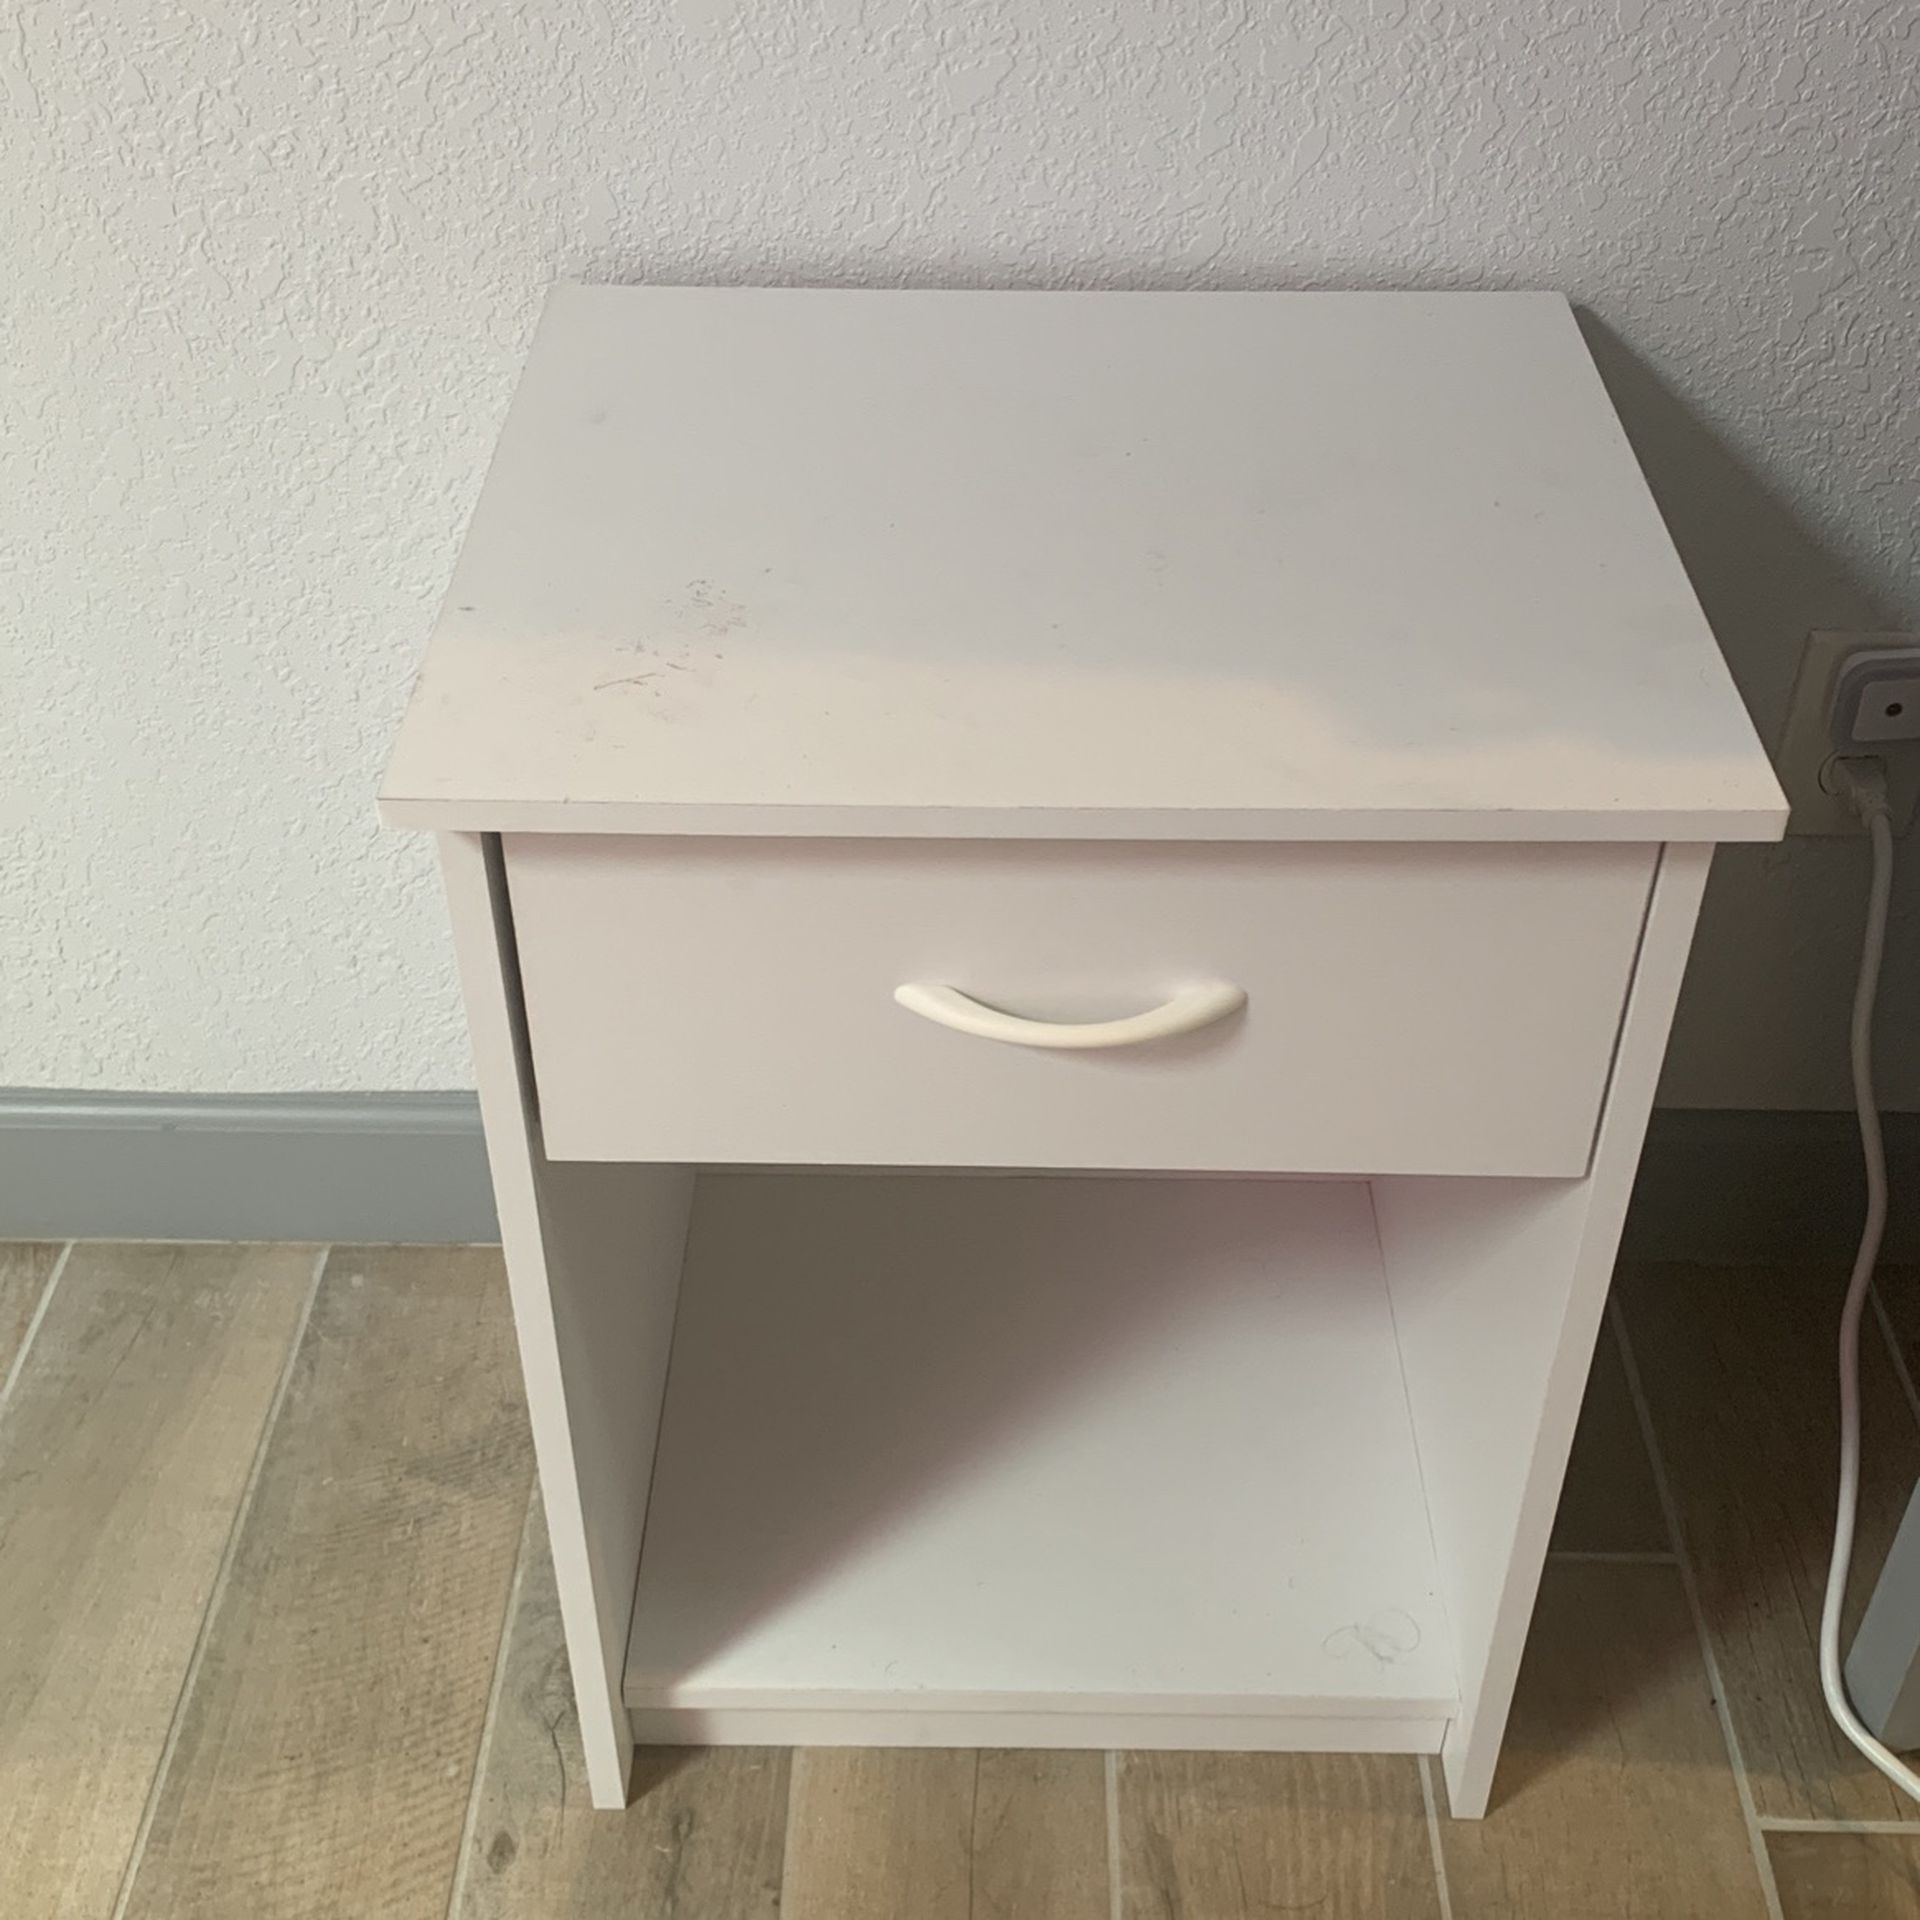 White Bed Stand Lamp Stand Desk With Cabinet Drawer 